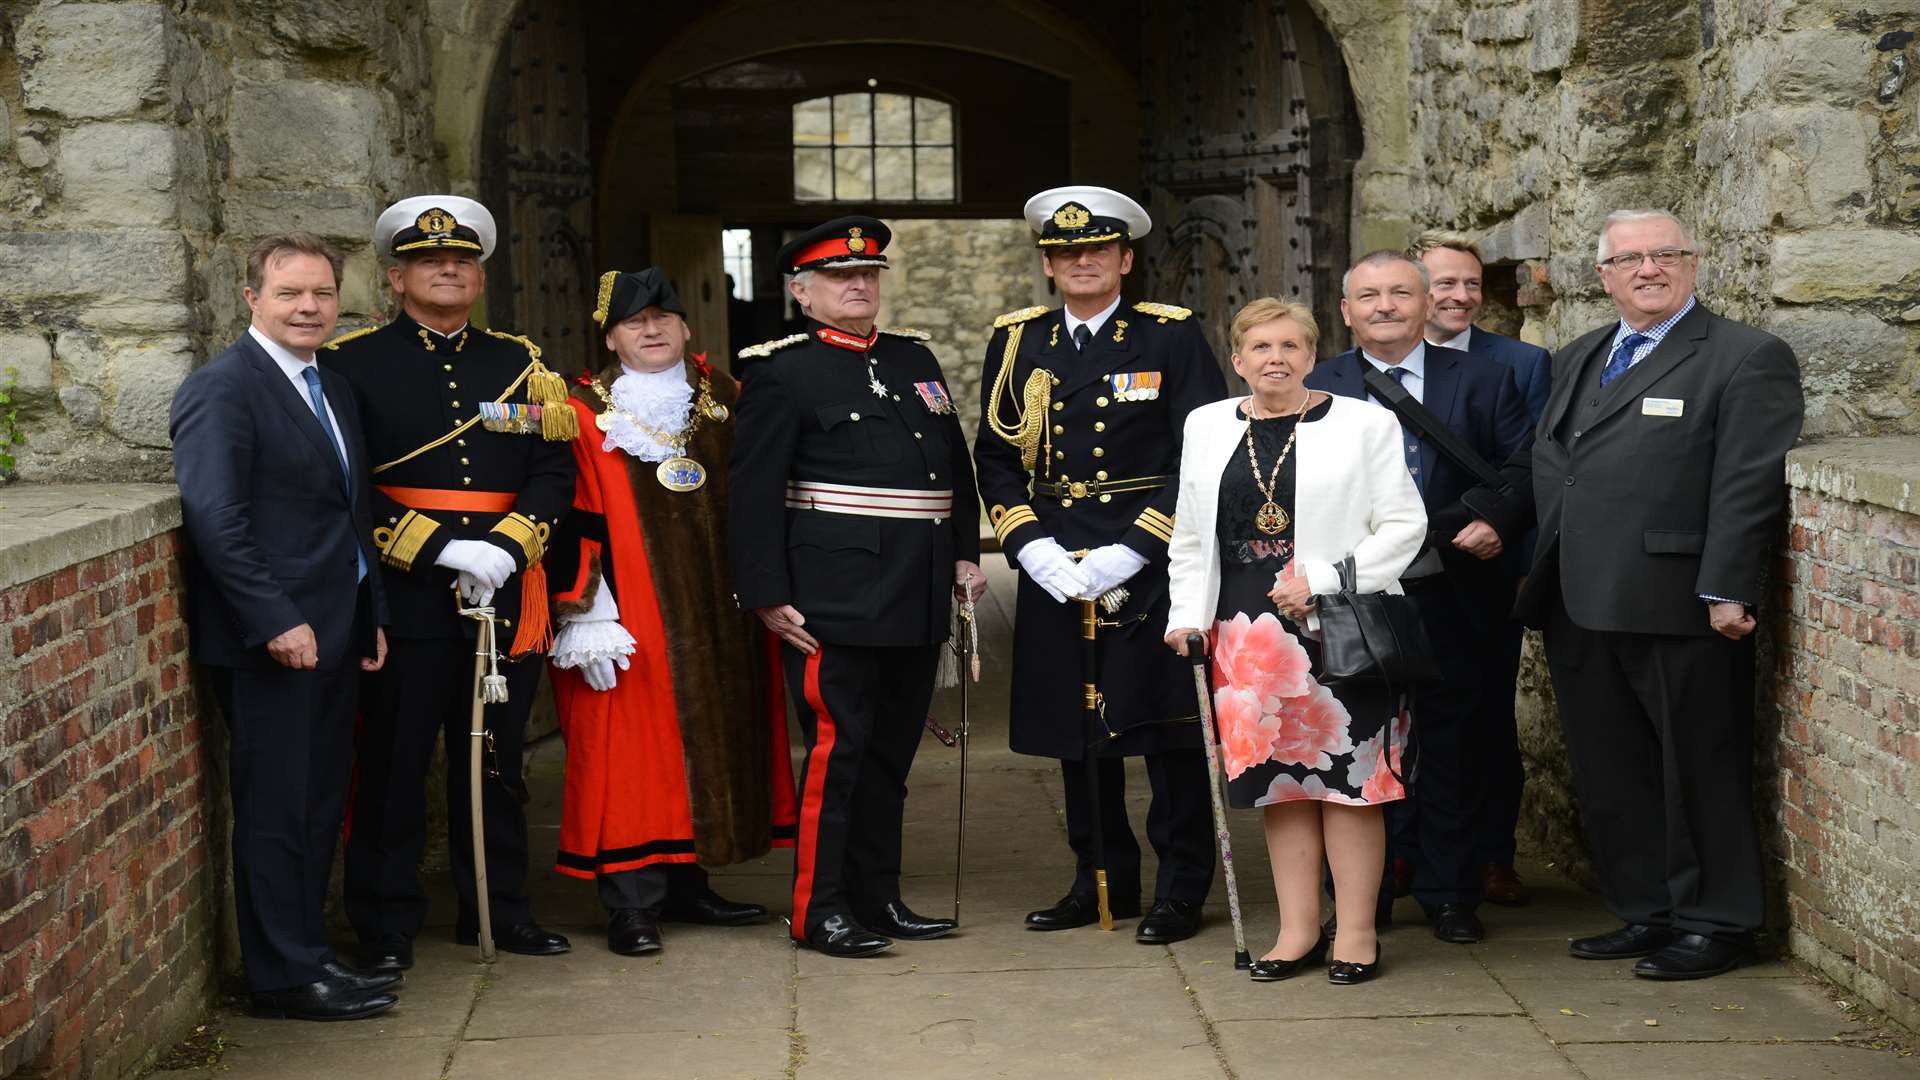 His Highness Prince Maurits of Orange-Nassau, van Vollenhoven with VIPs at Upnor Castle.